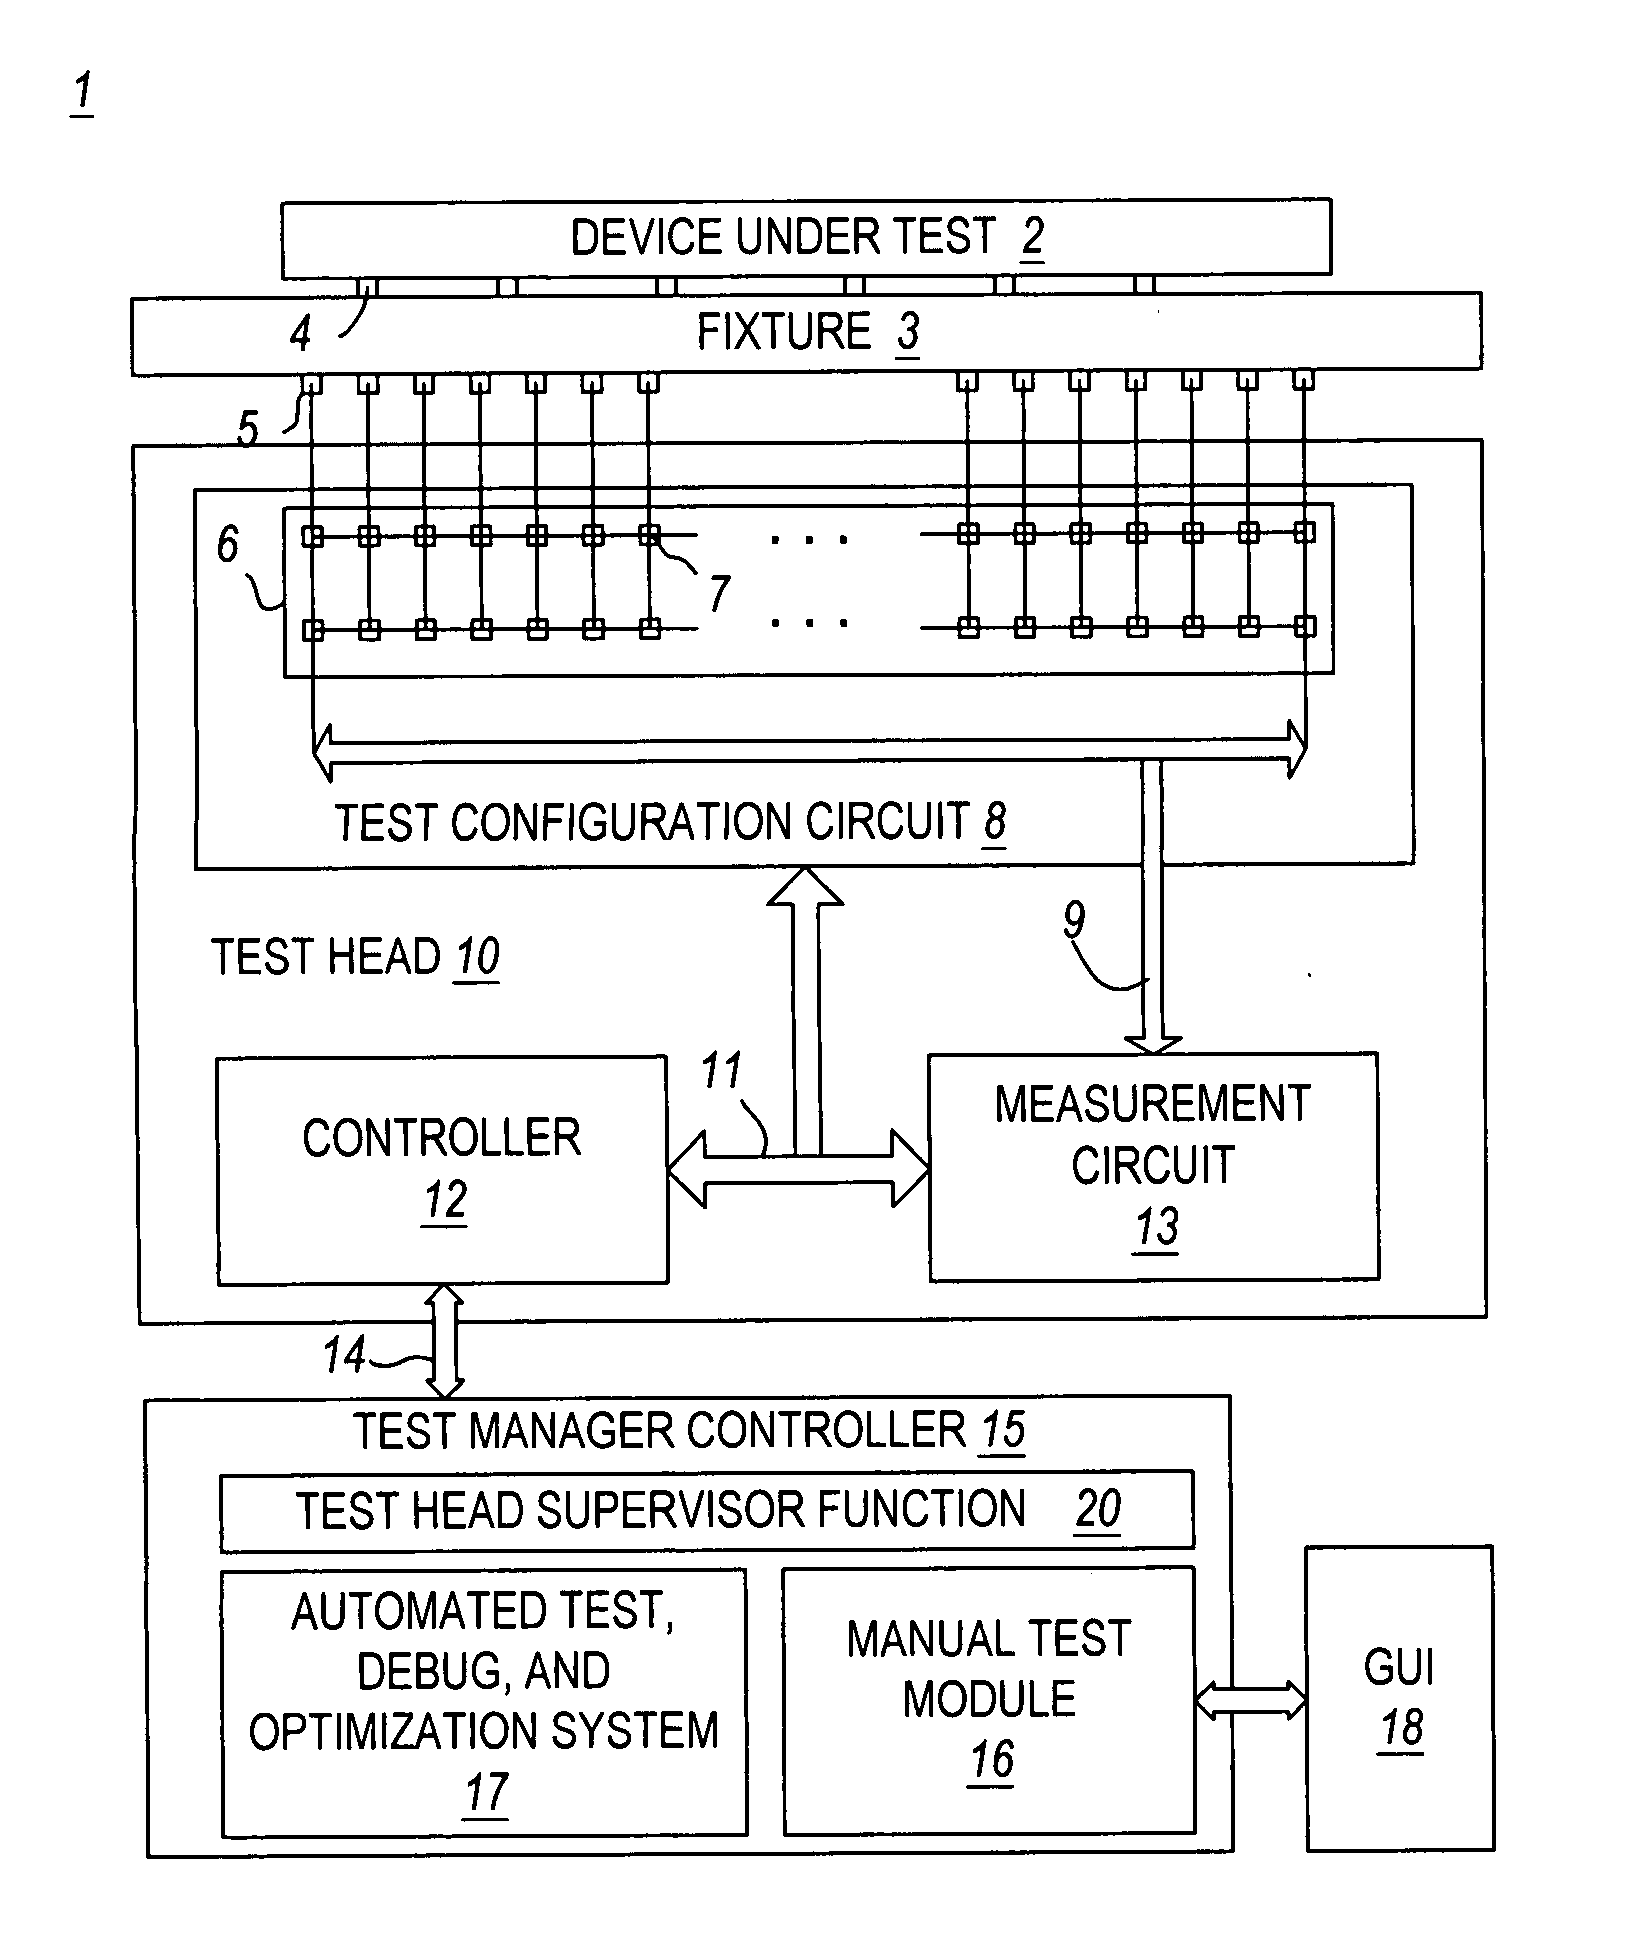 Framework that maximizes the usage of testhead resources in in-circuit test system